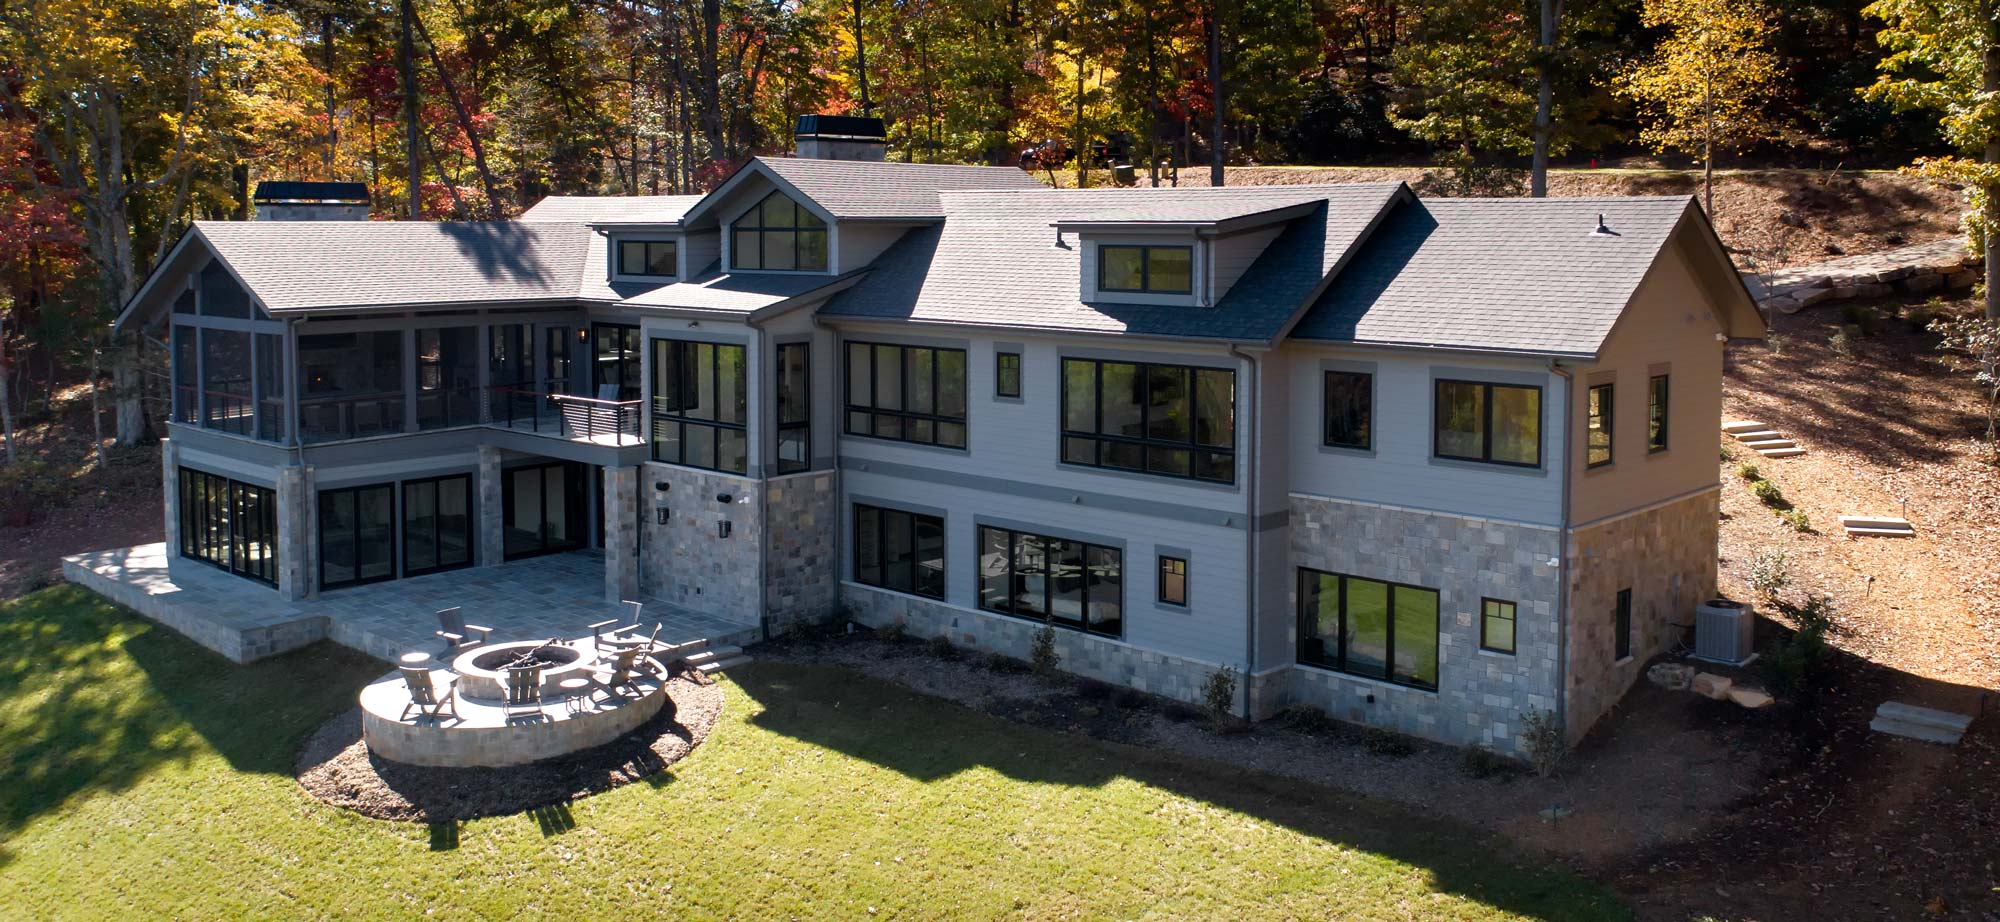 Design Elite architectural innovation in Upstate South Carolina our work mountain residential The Cliffs 1 hero image - Mountain Residential